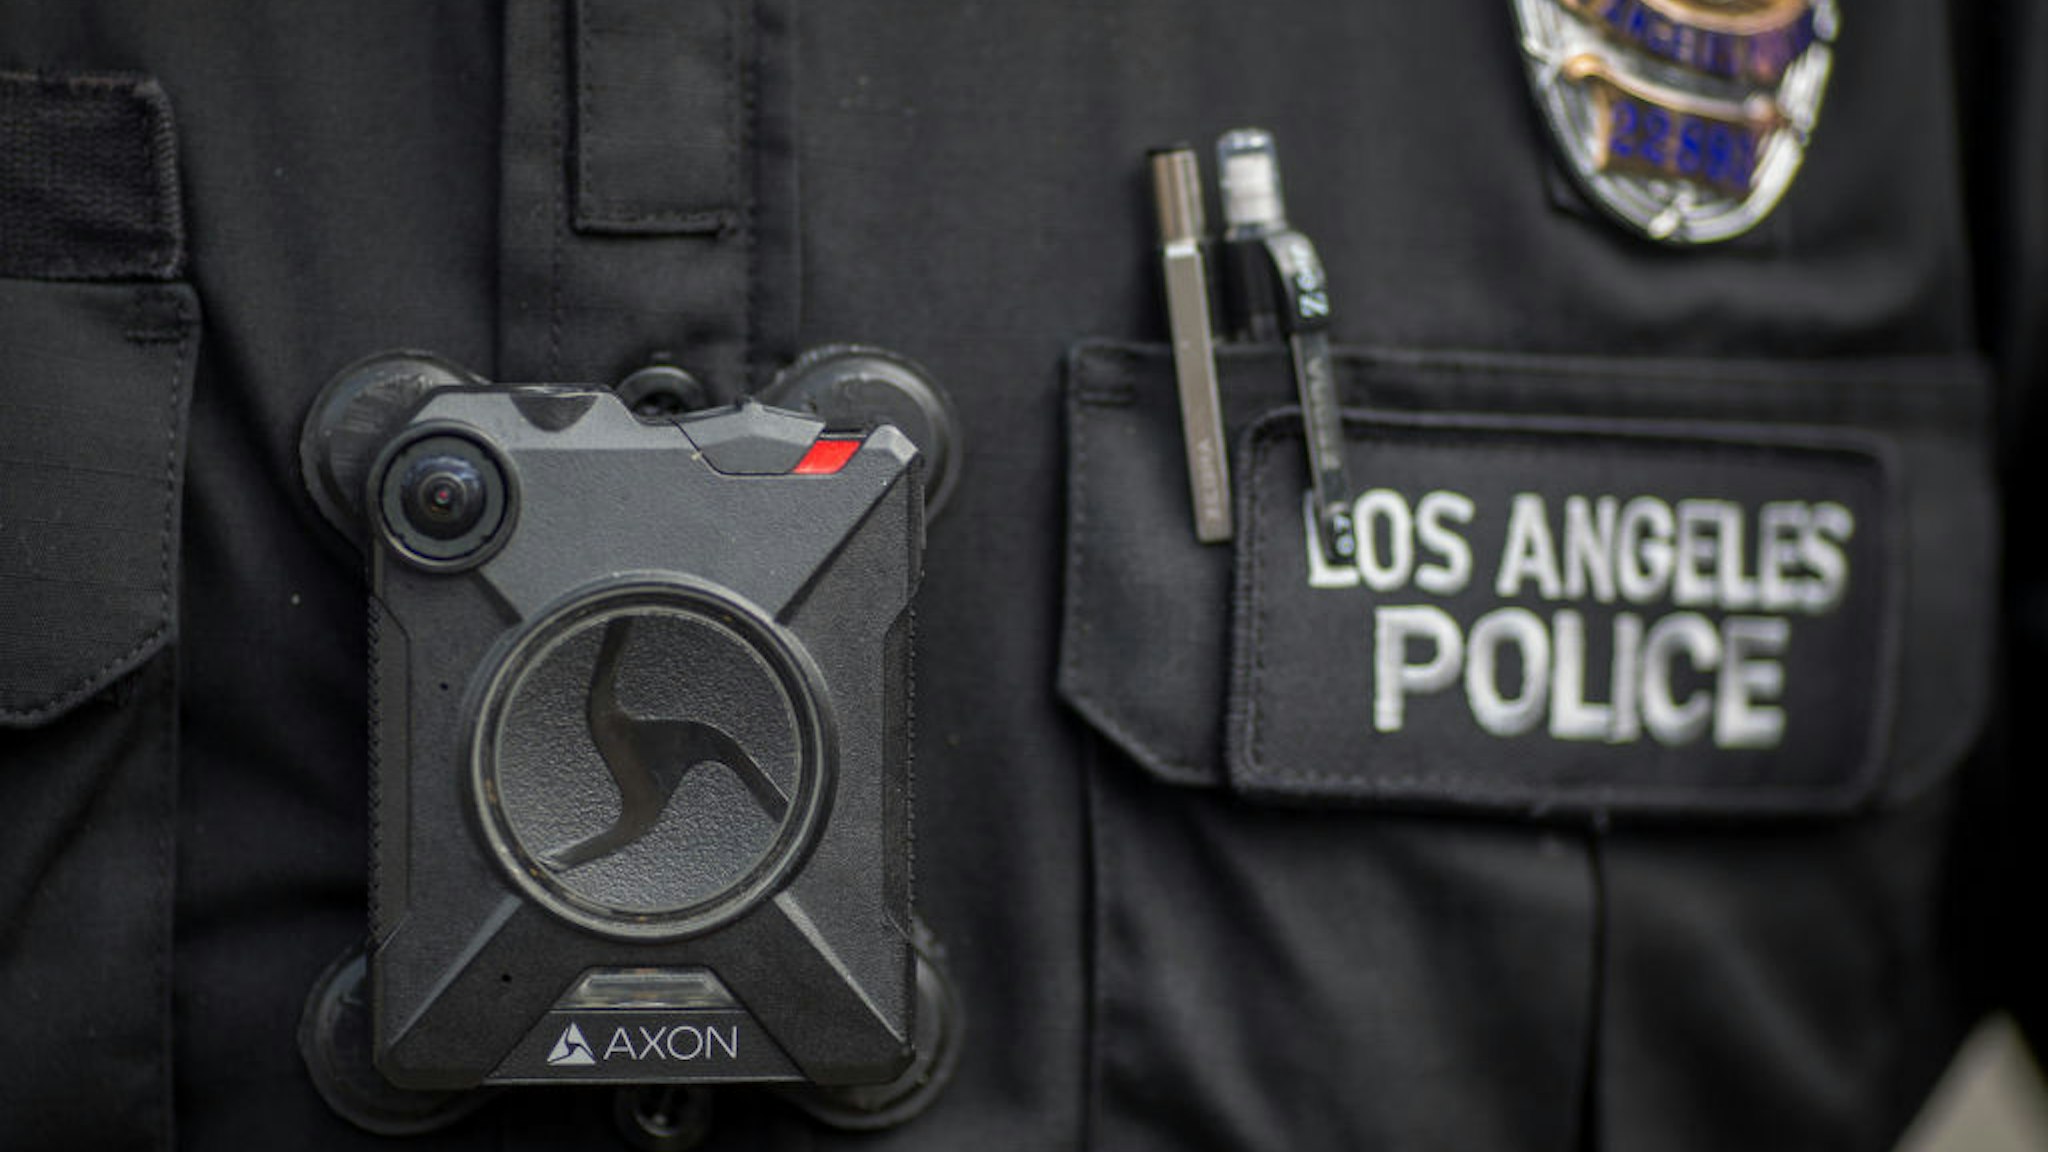 LOS ANGELES, CA - FEBRUARY 18: A Los Angeles police officer wear an AXON body camera during the Immigrants Make America Great March to protest actions being taken by the Trump administration on February 18, 2017 in Los Angeles, California. Protesters are calling for an end to stepped up ICE raids and deportations, and that health care be provided for documented and undocumented people. (Photo by David McNew/Getty Images)